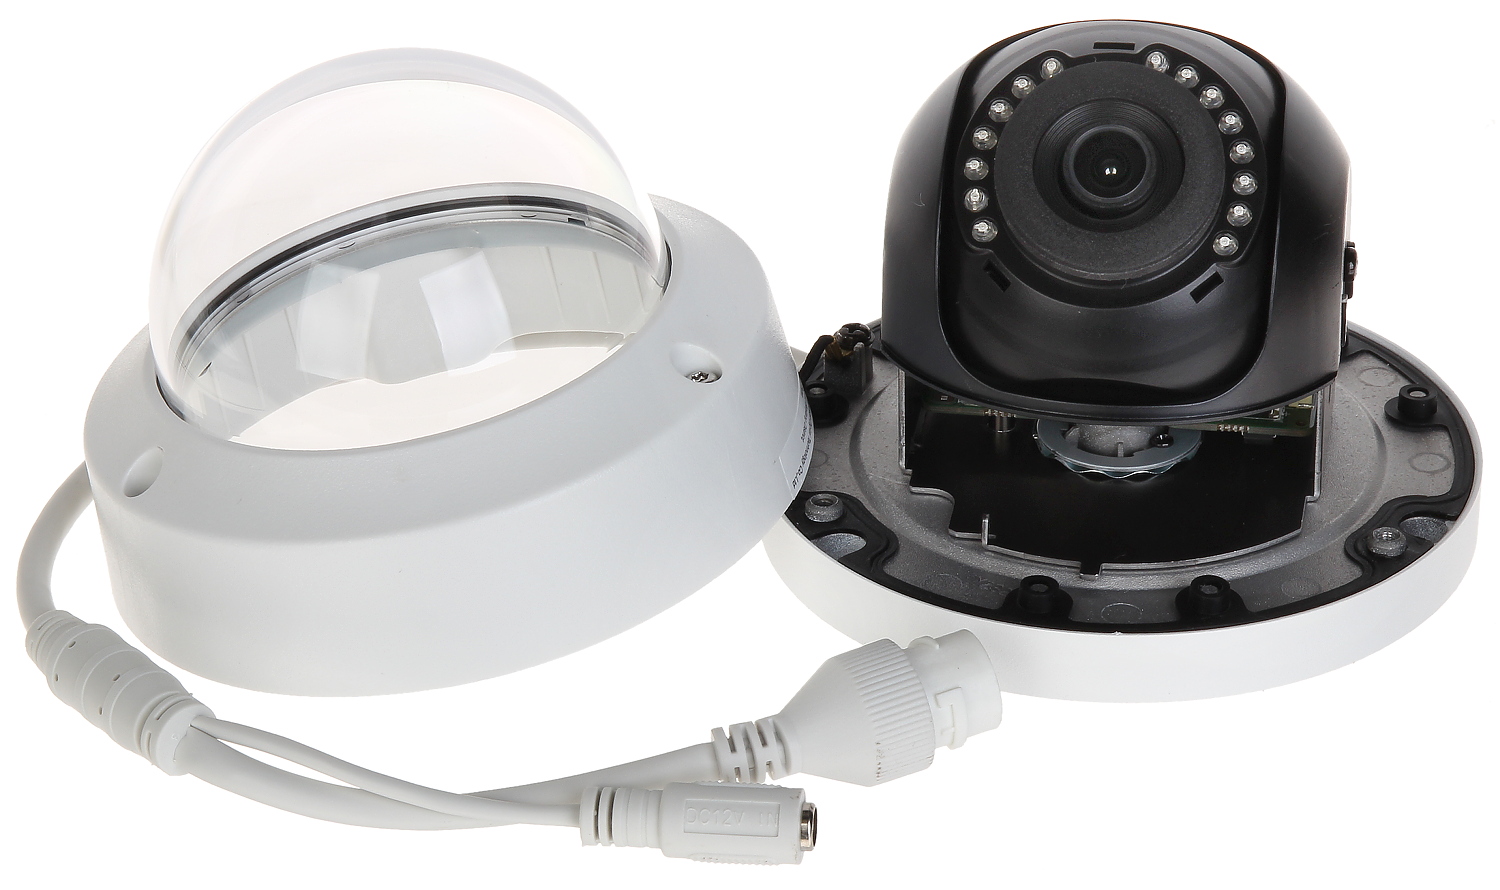 IP VANDALPROOF CAMERA DS-2CD1123G0-I(2.8MM) - 1080p Hi - Dome Cameras with Fixed-Focal Lens 